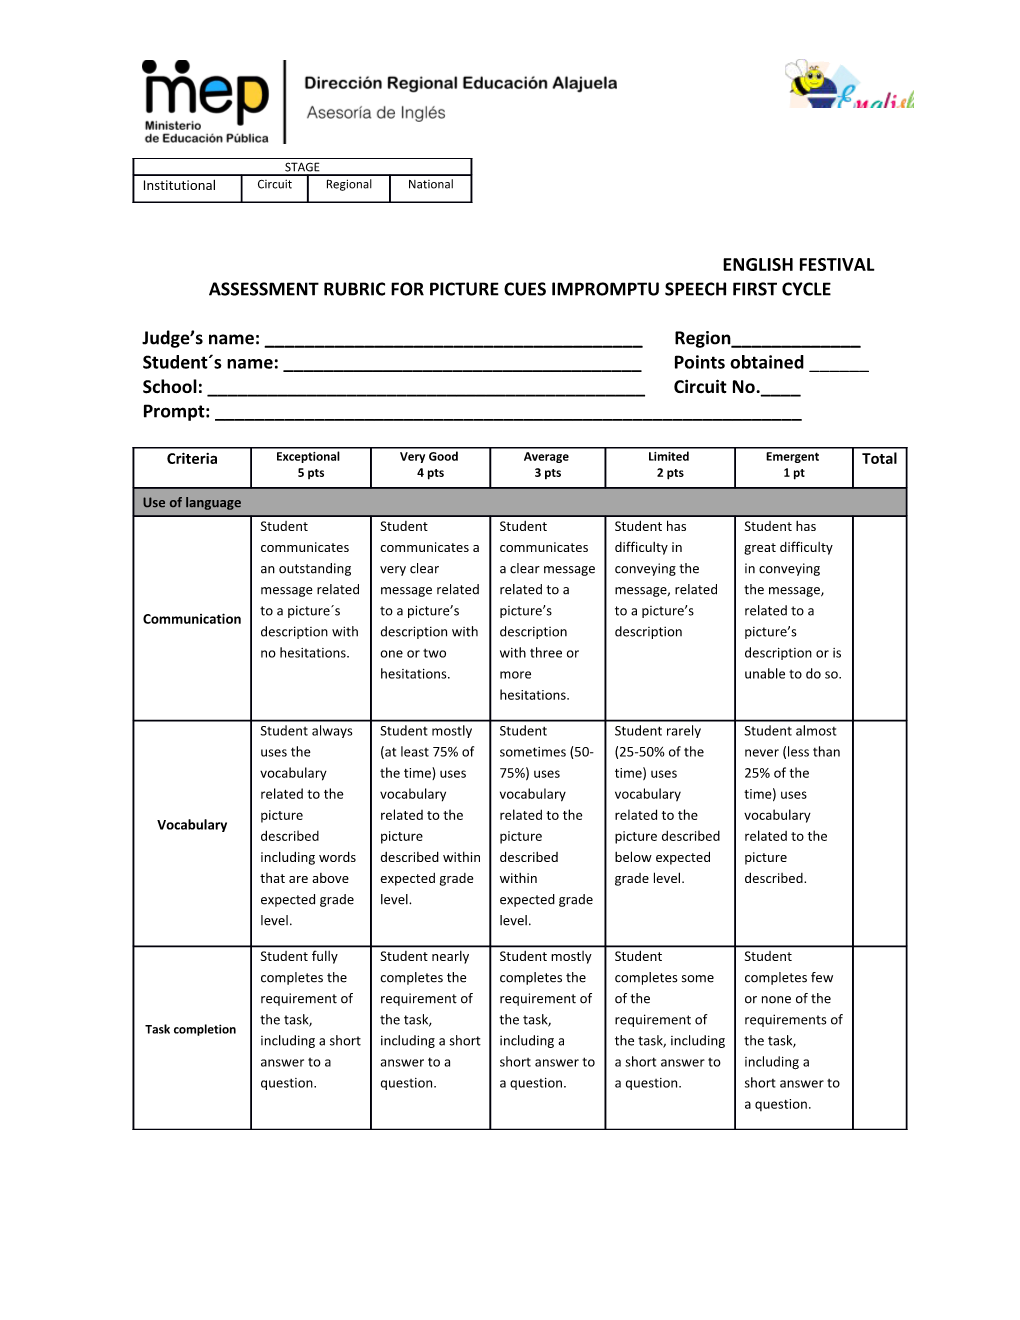 Assessment Rubric for Picture Cues Impromptu Speech First Cycle